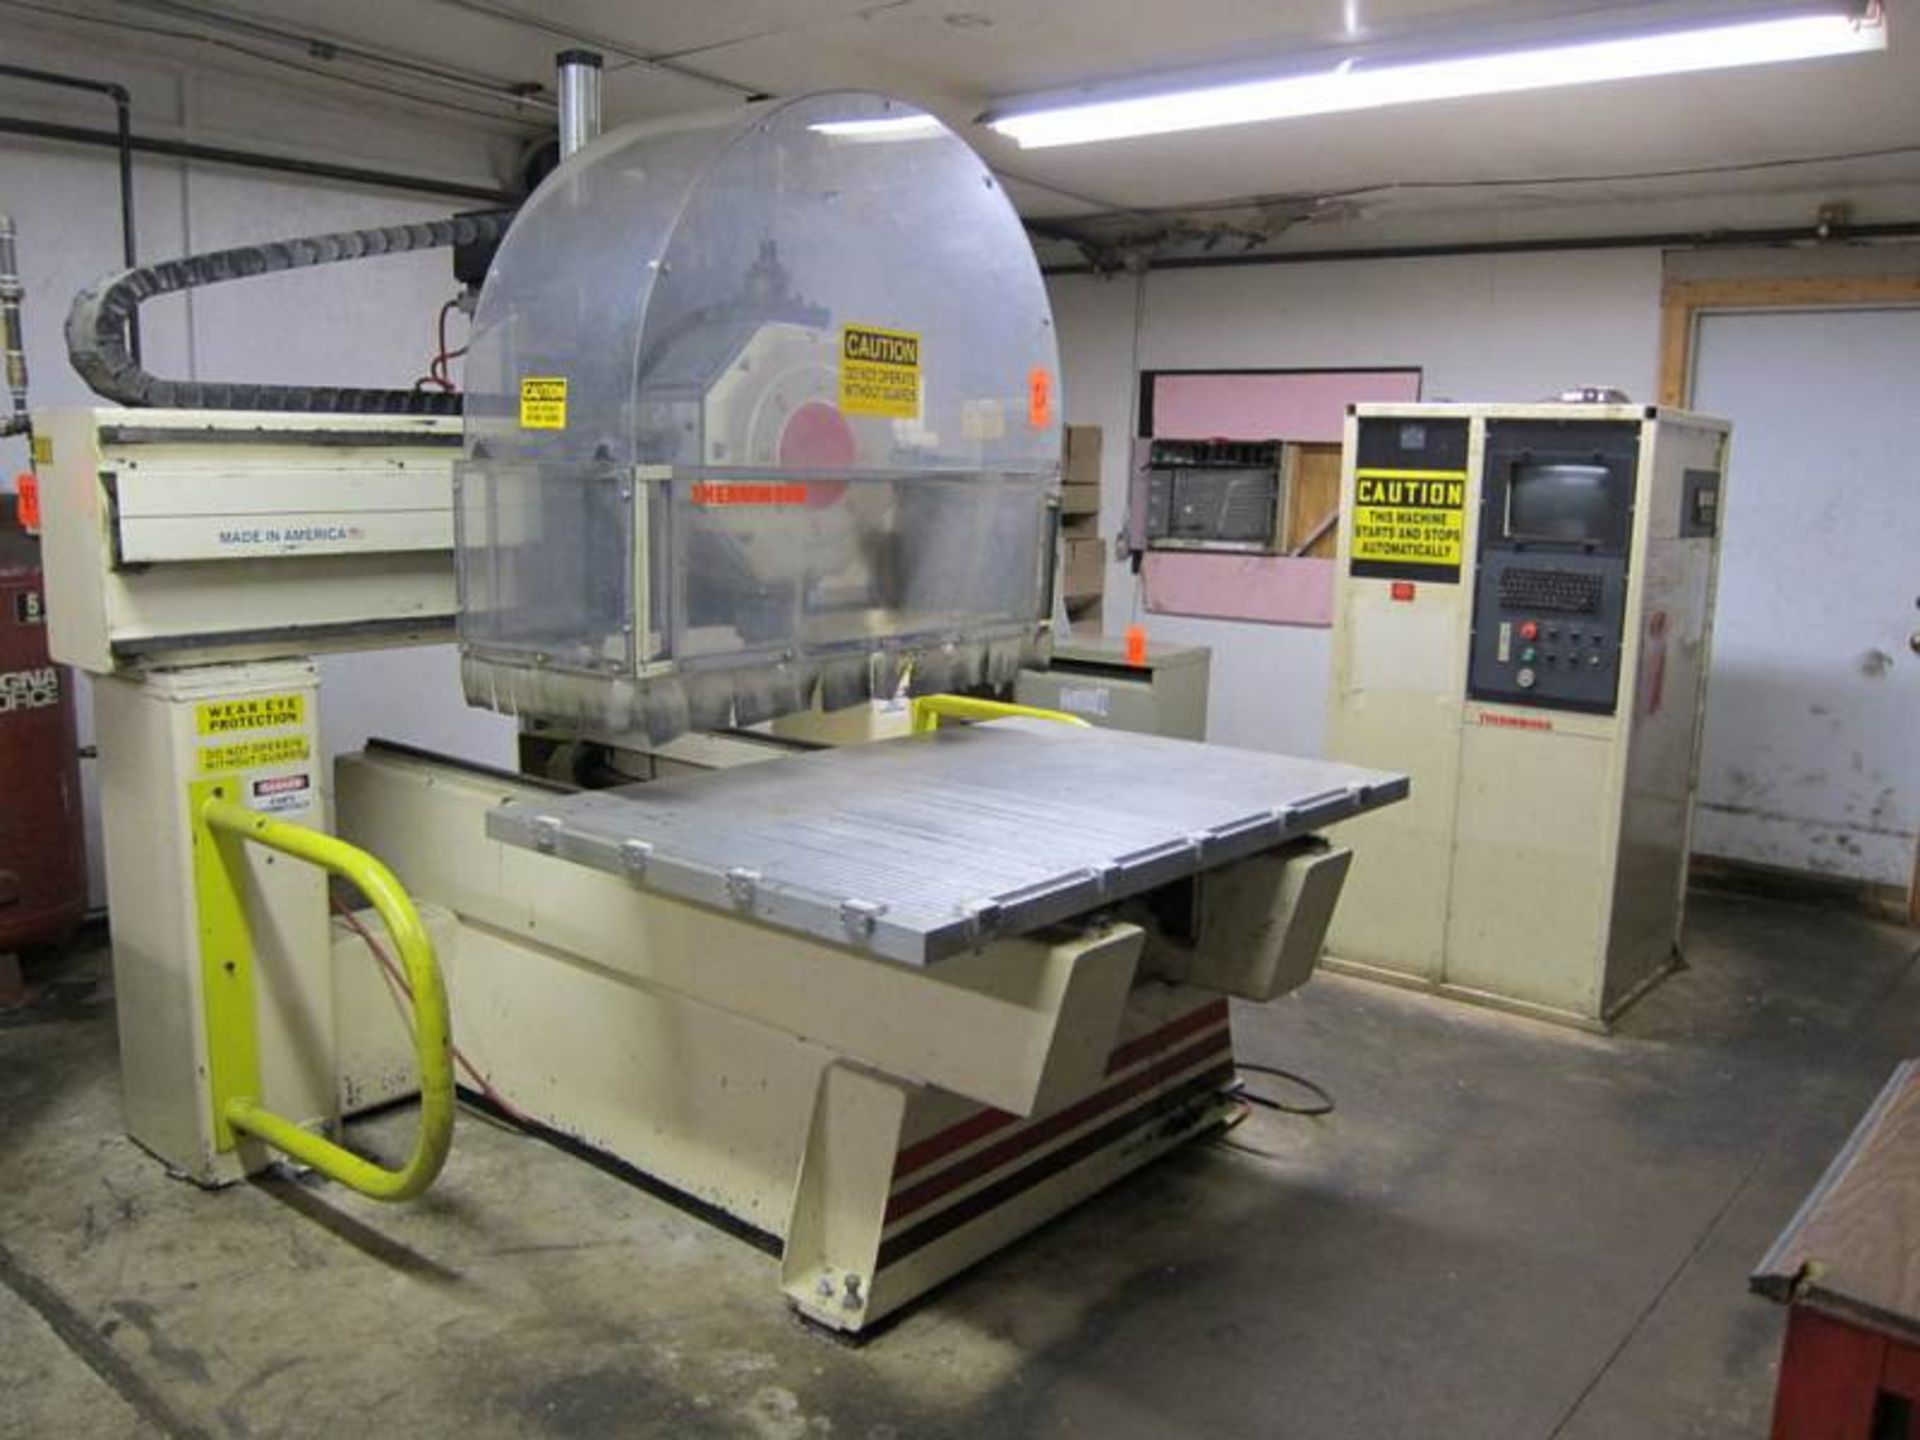 Thermwood Model C-40 3-Axis CNC Router with 8 Position Turret, S/N C401740399, New 1999 General